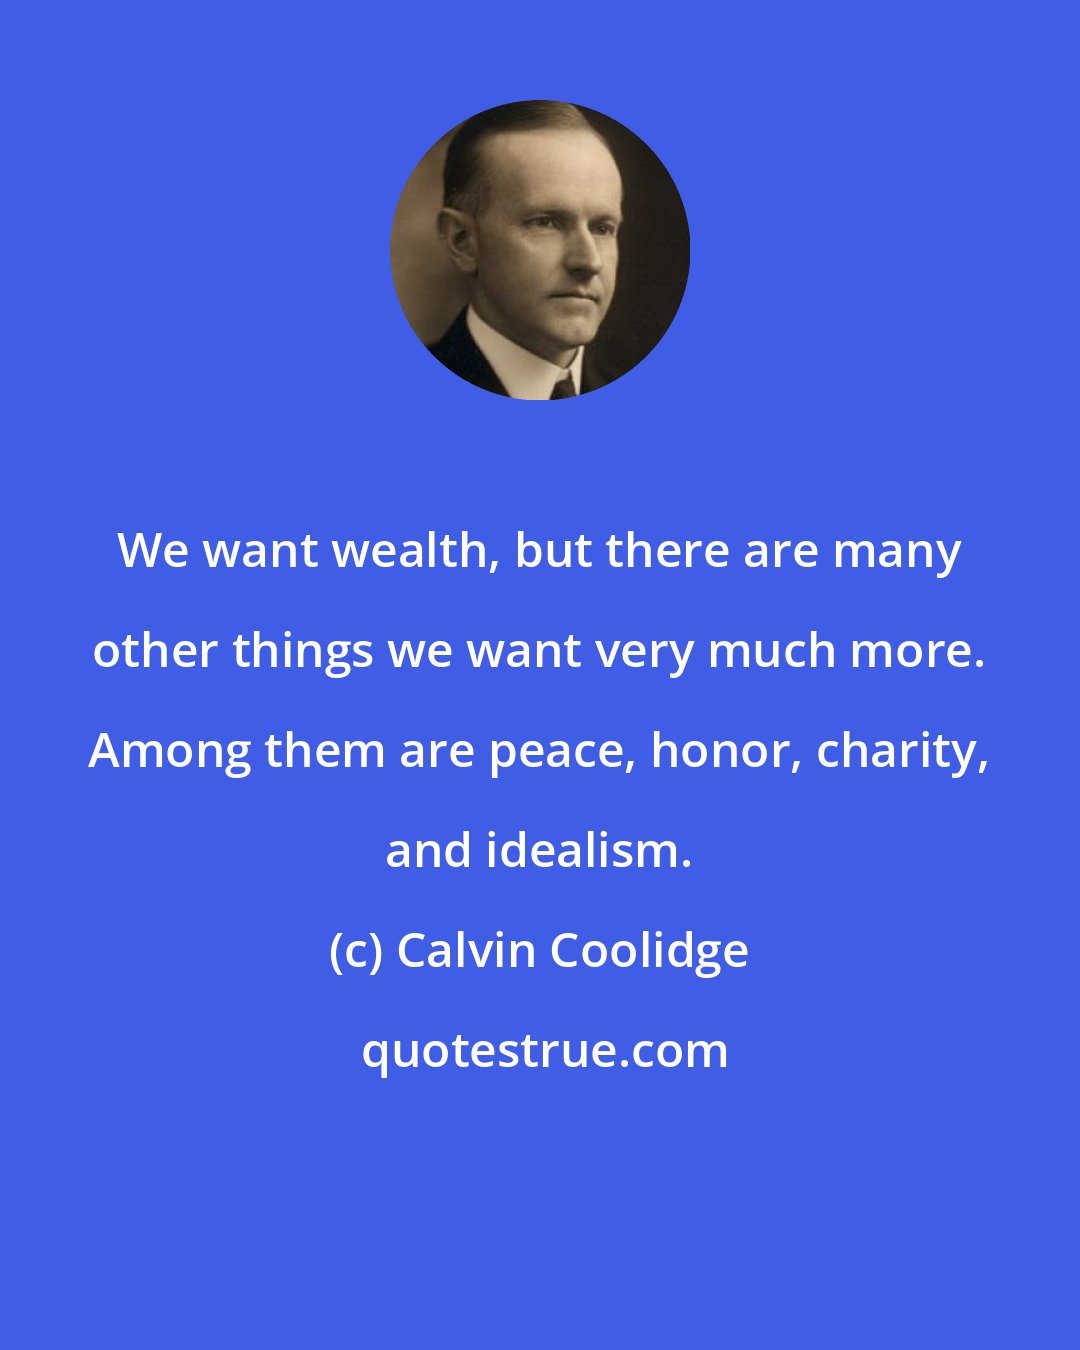 Calvin Coolidge: We want wealth, but there are many other things we want very much more. Among them are peace, honor, charity, and idealism.